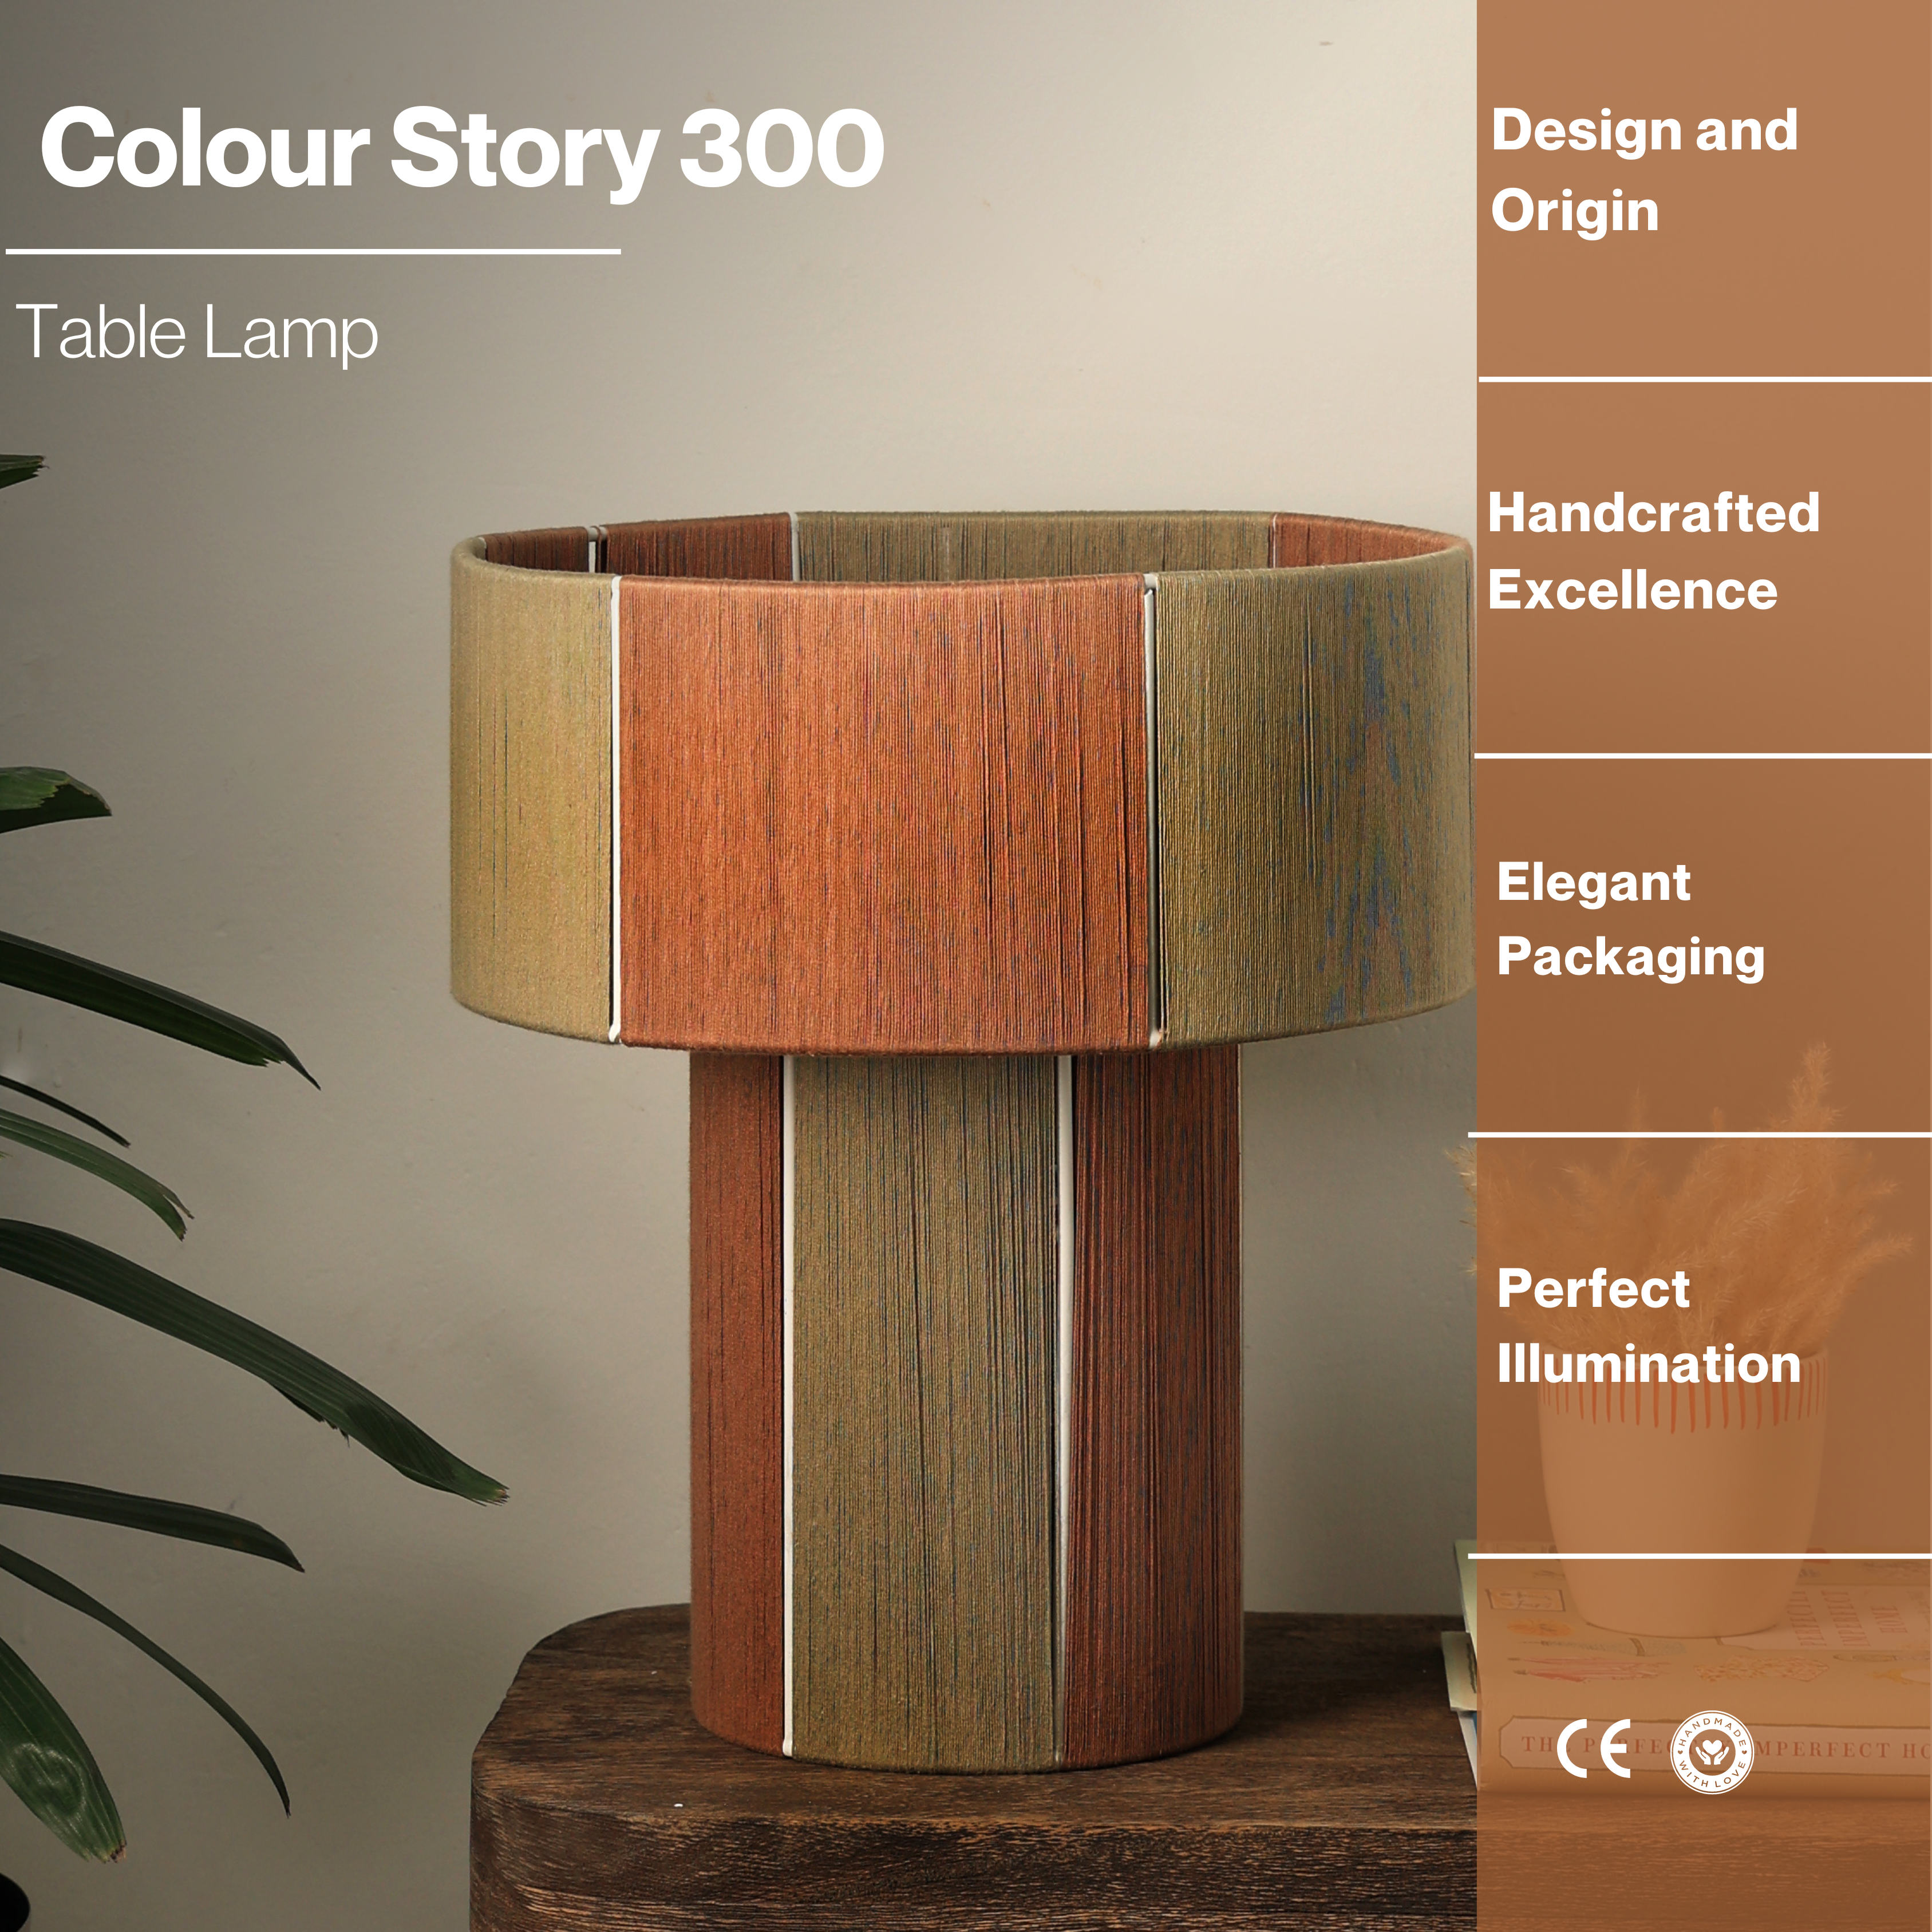 Colour Story 300 - Table Lamp - Threading Pattern, Cotton Threading Lampshade, Sturdy Construction